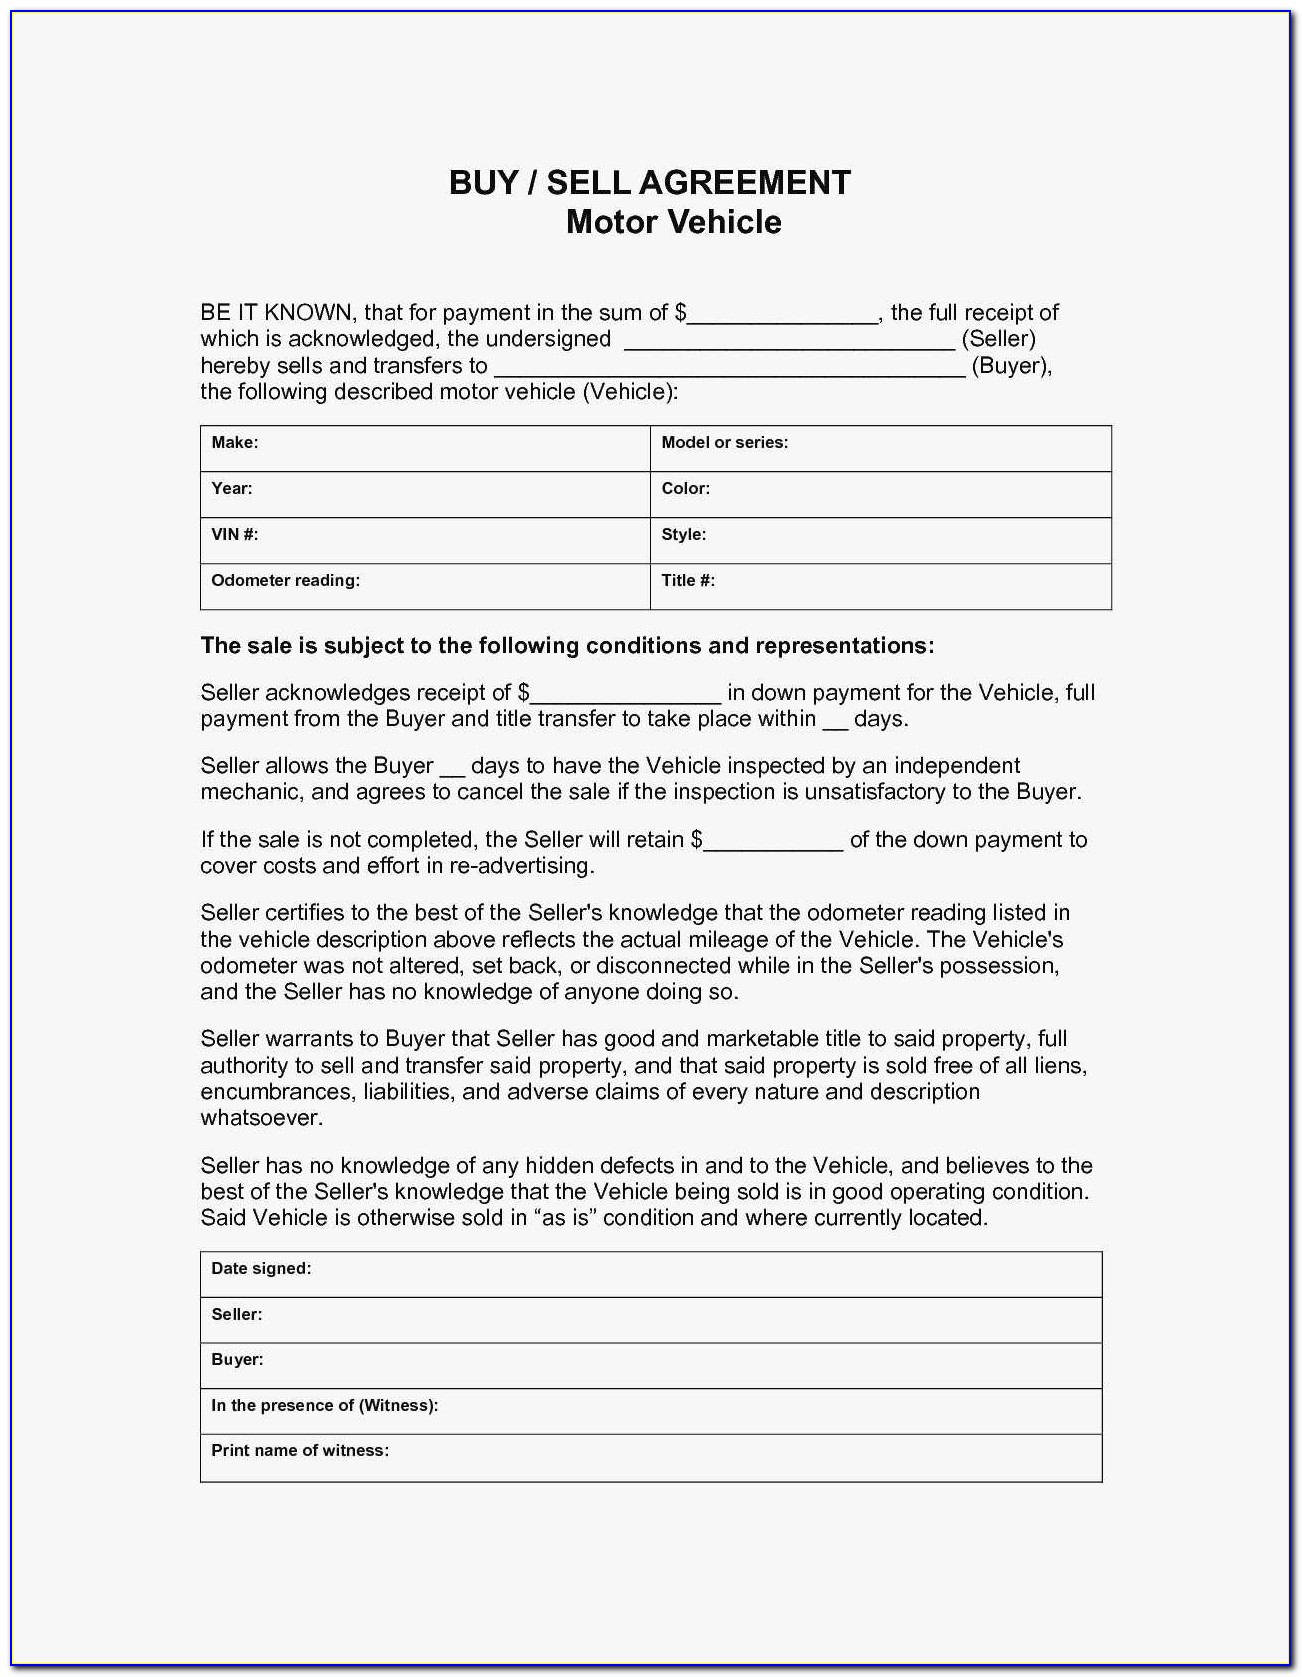 Texas Real Estate For Sale By Owner Contract Forms Lovely 25 Best Texas Car Sale Form